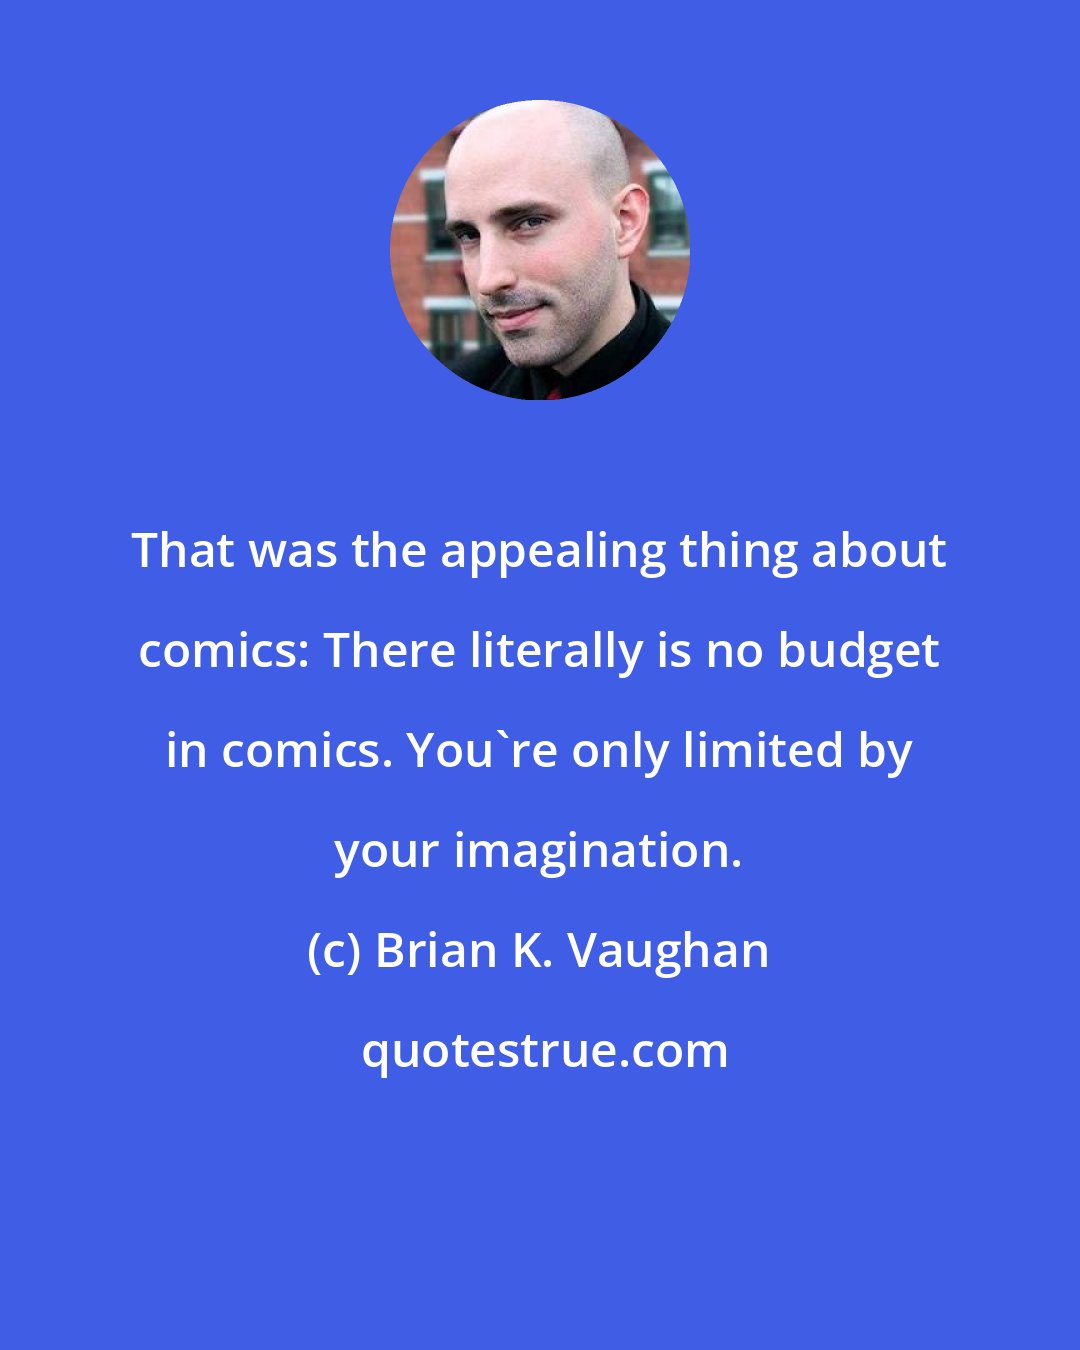 Brian K. Vaughan: That was the appealing thing about comics: There literally is no budget in comics. You're only limited by your imagination.